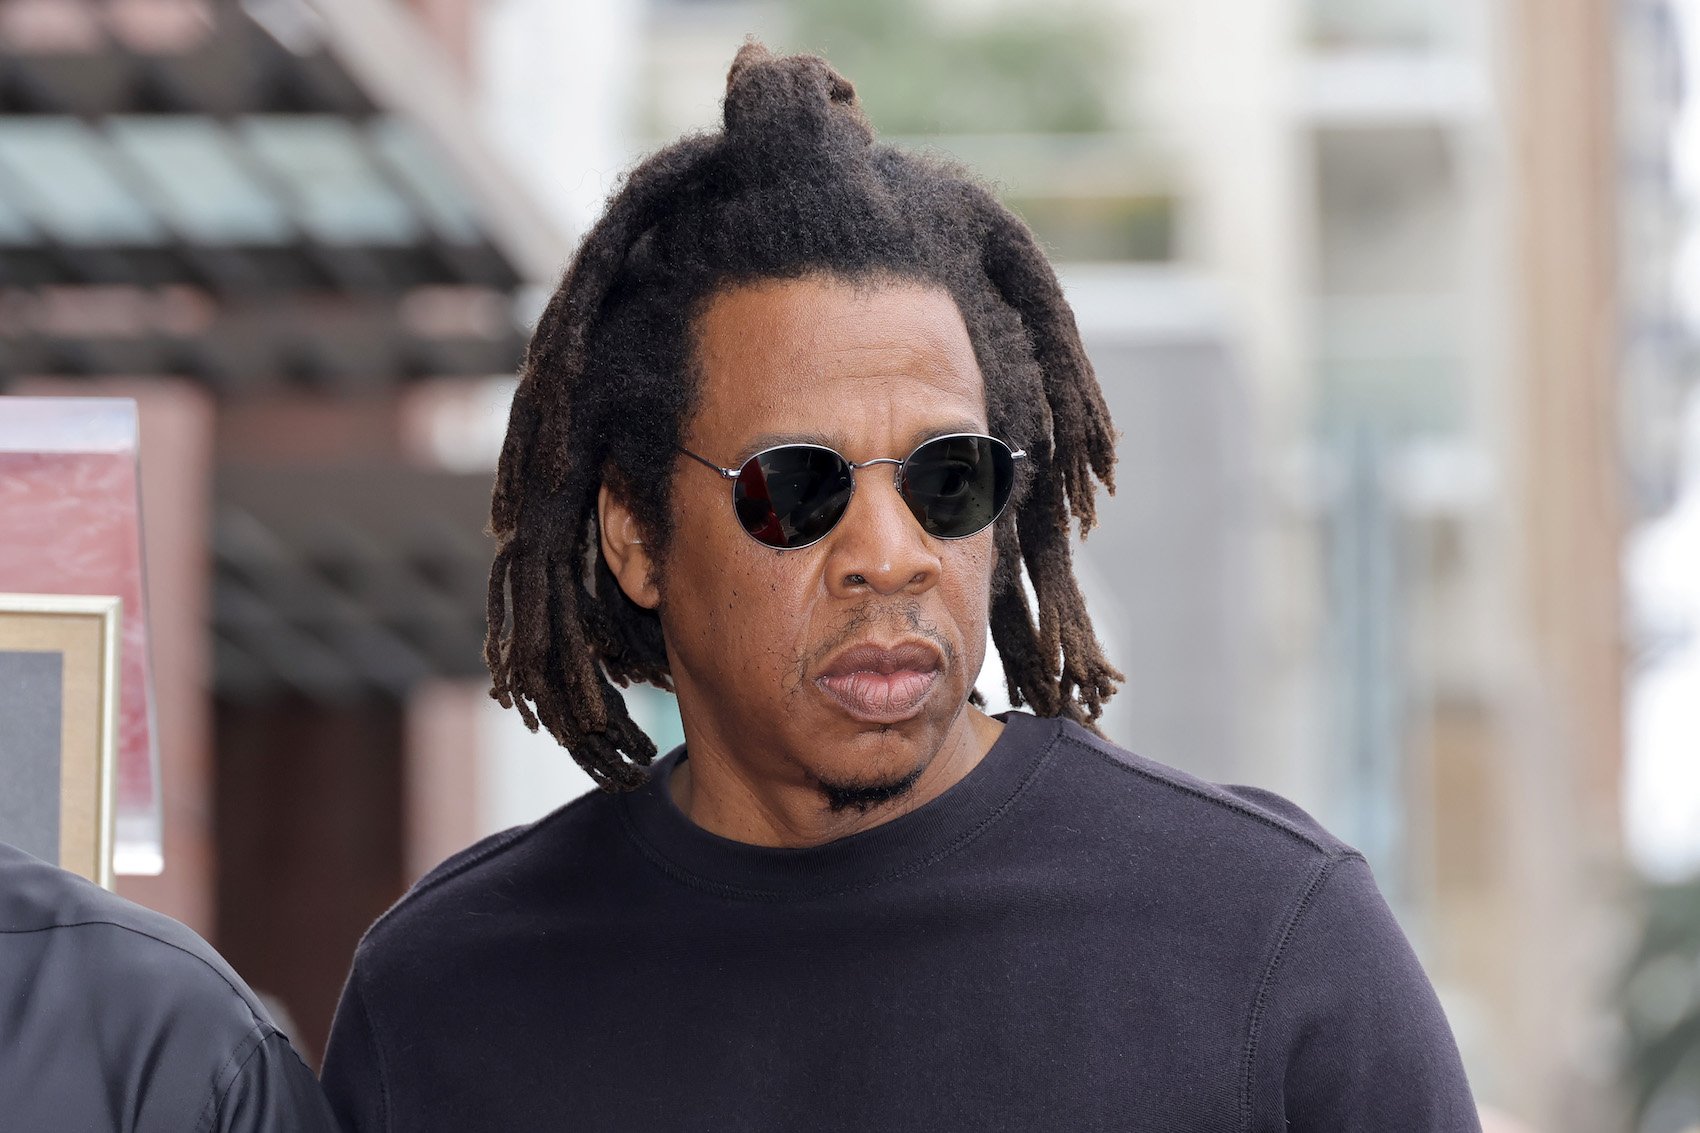 Jay-Z, who released his album 'In My Lifetime Vol. 1' in November 1997, wearing sunglasses and a black T-shirt